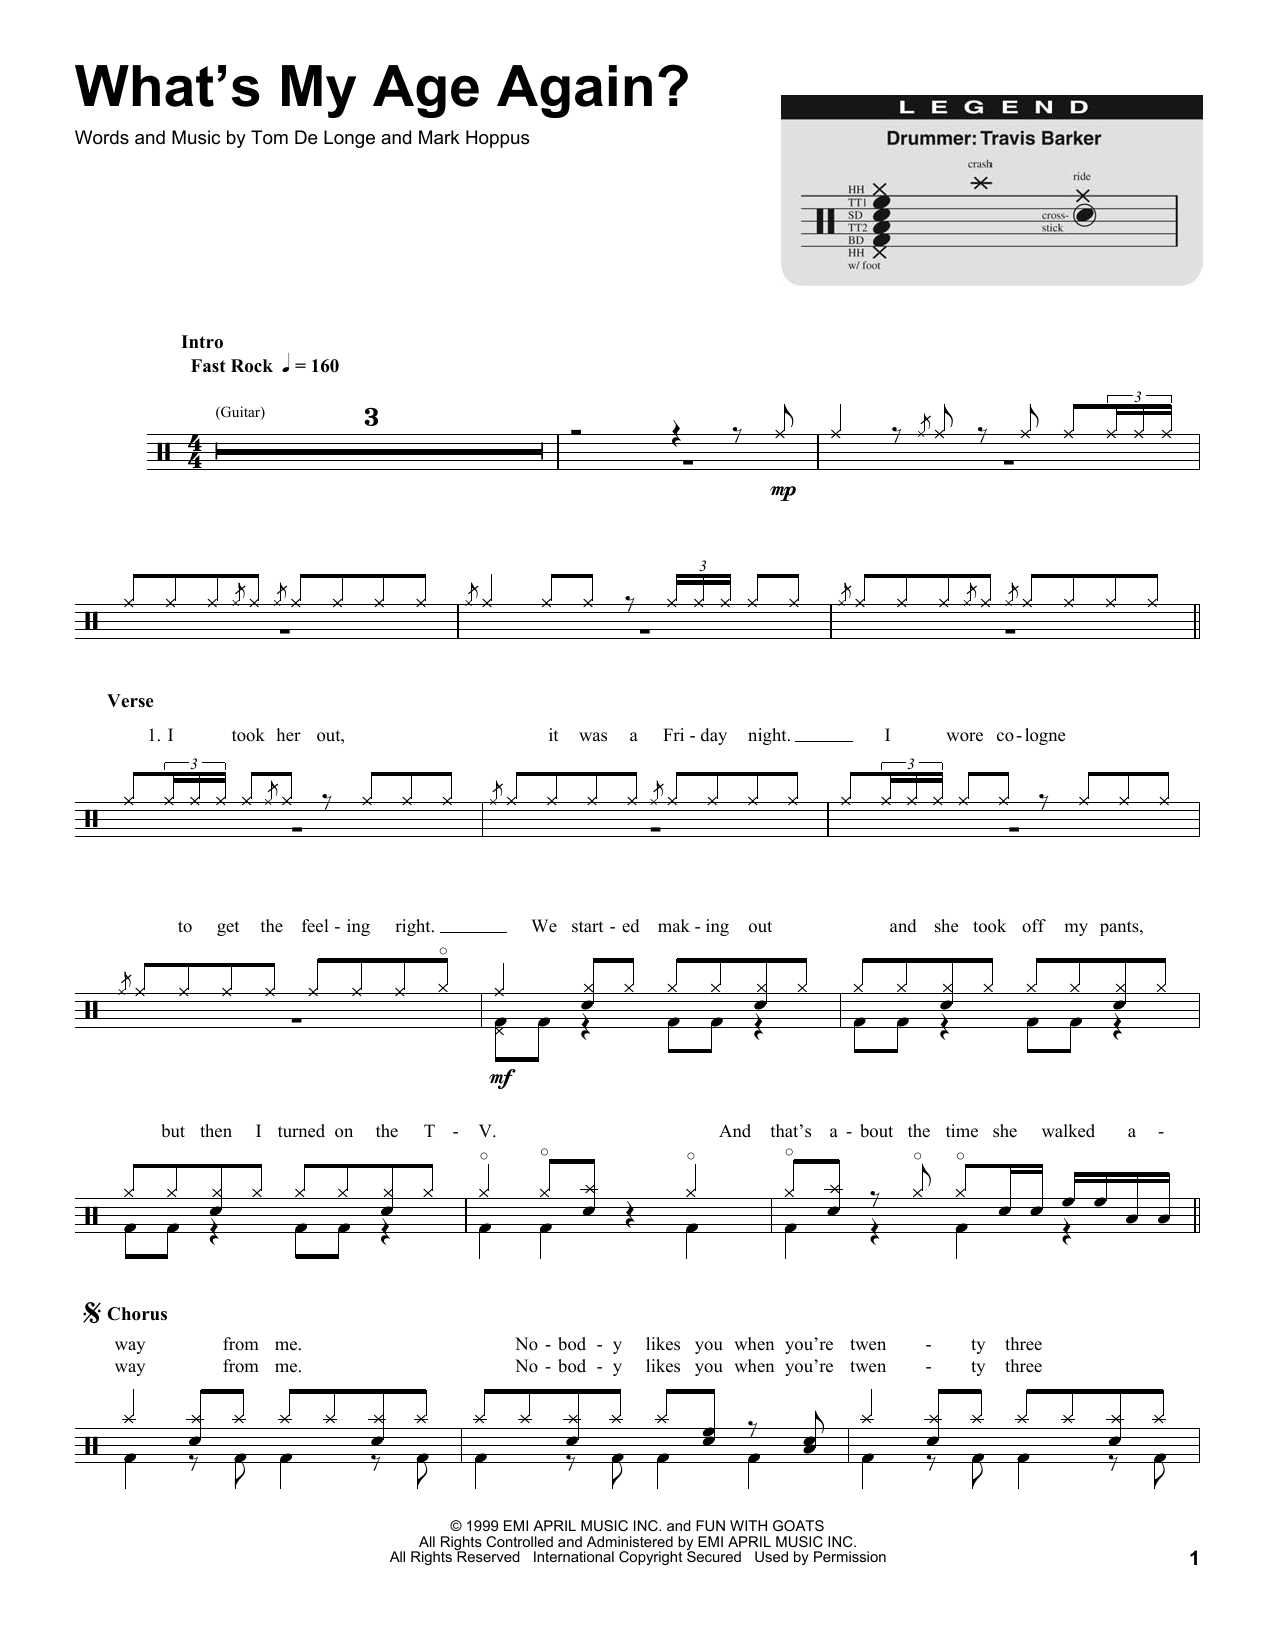 Download Blink 182 What's My Age Again? Sheet Music